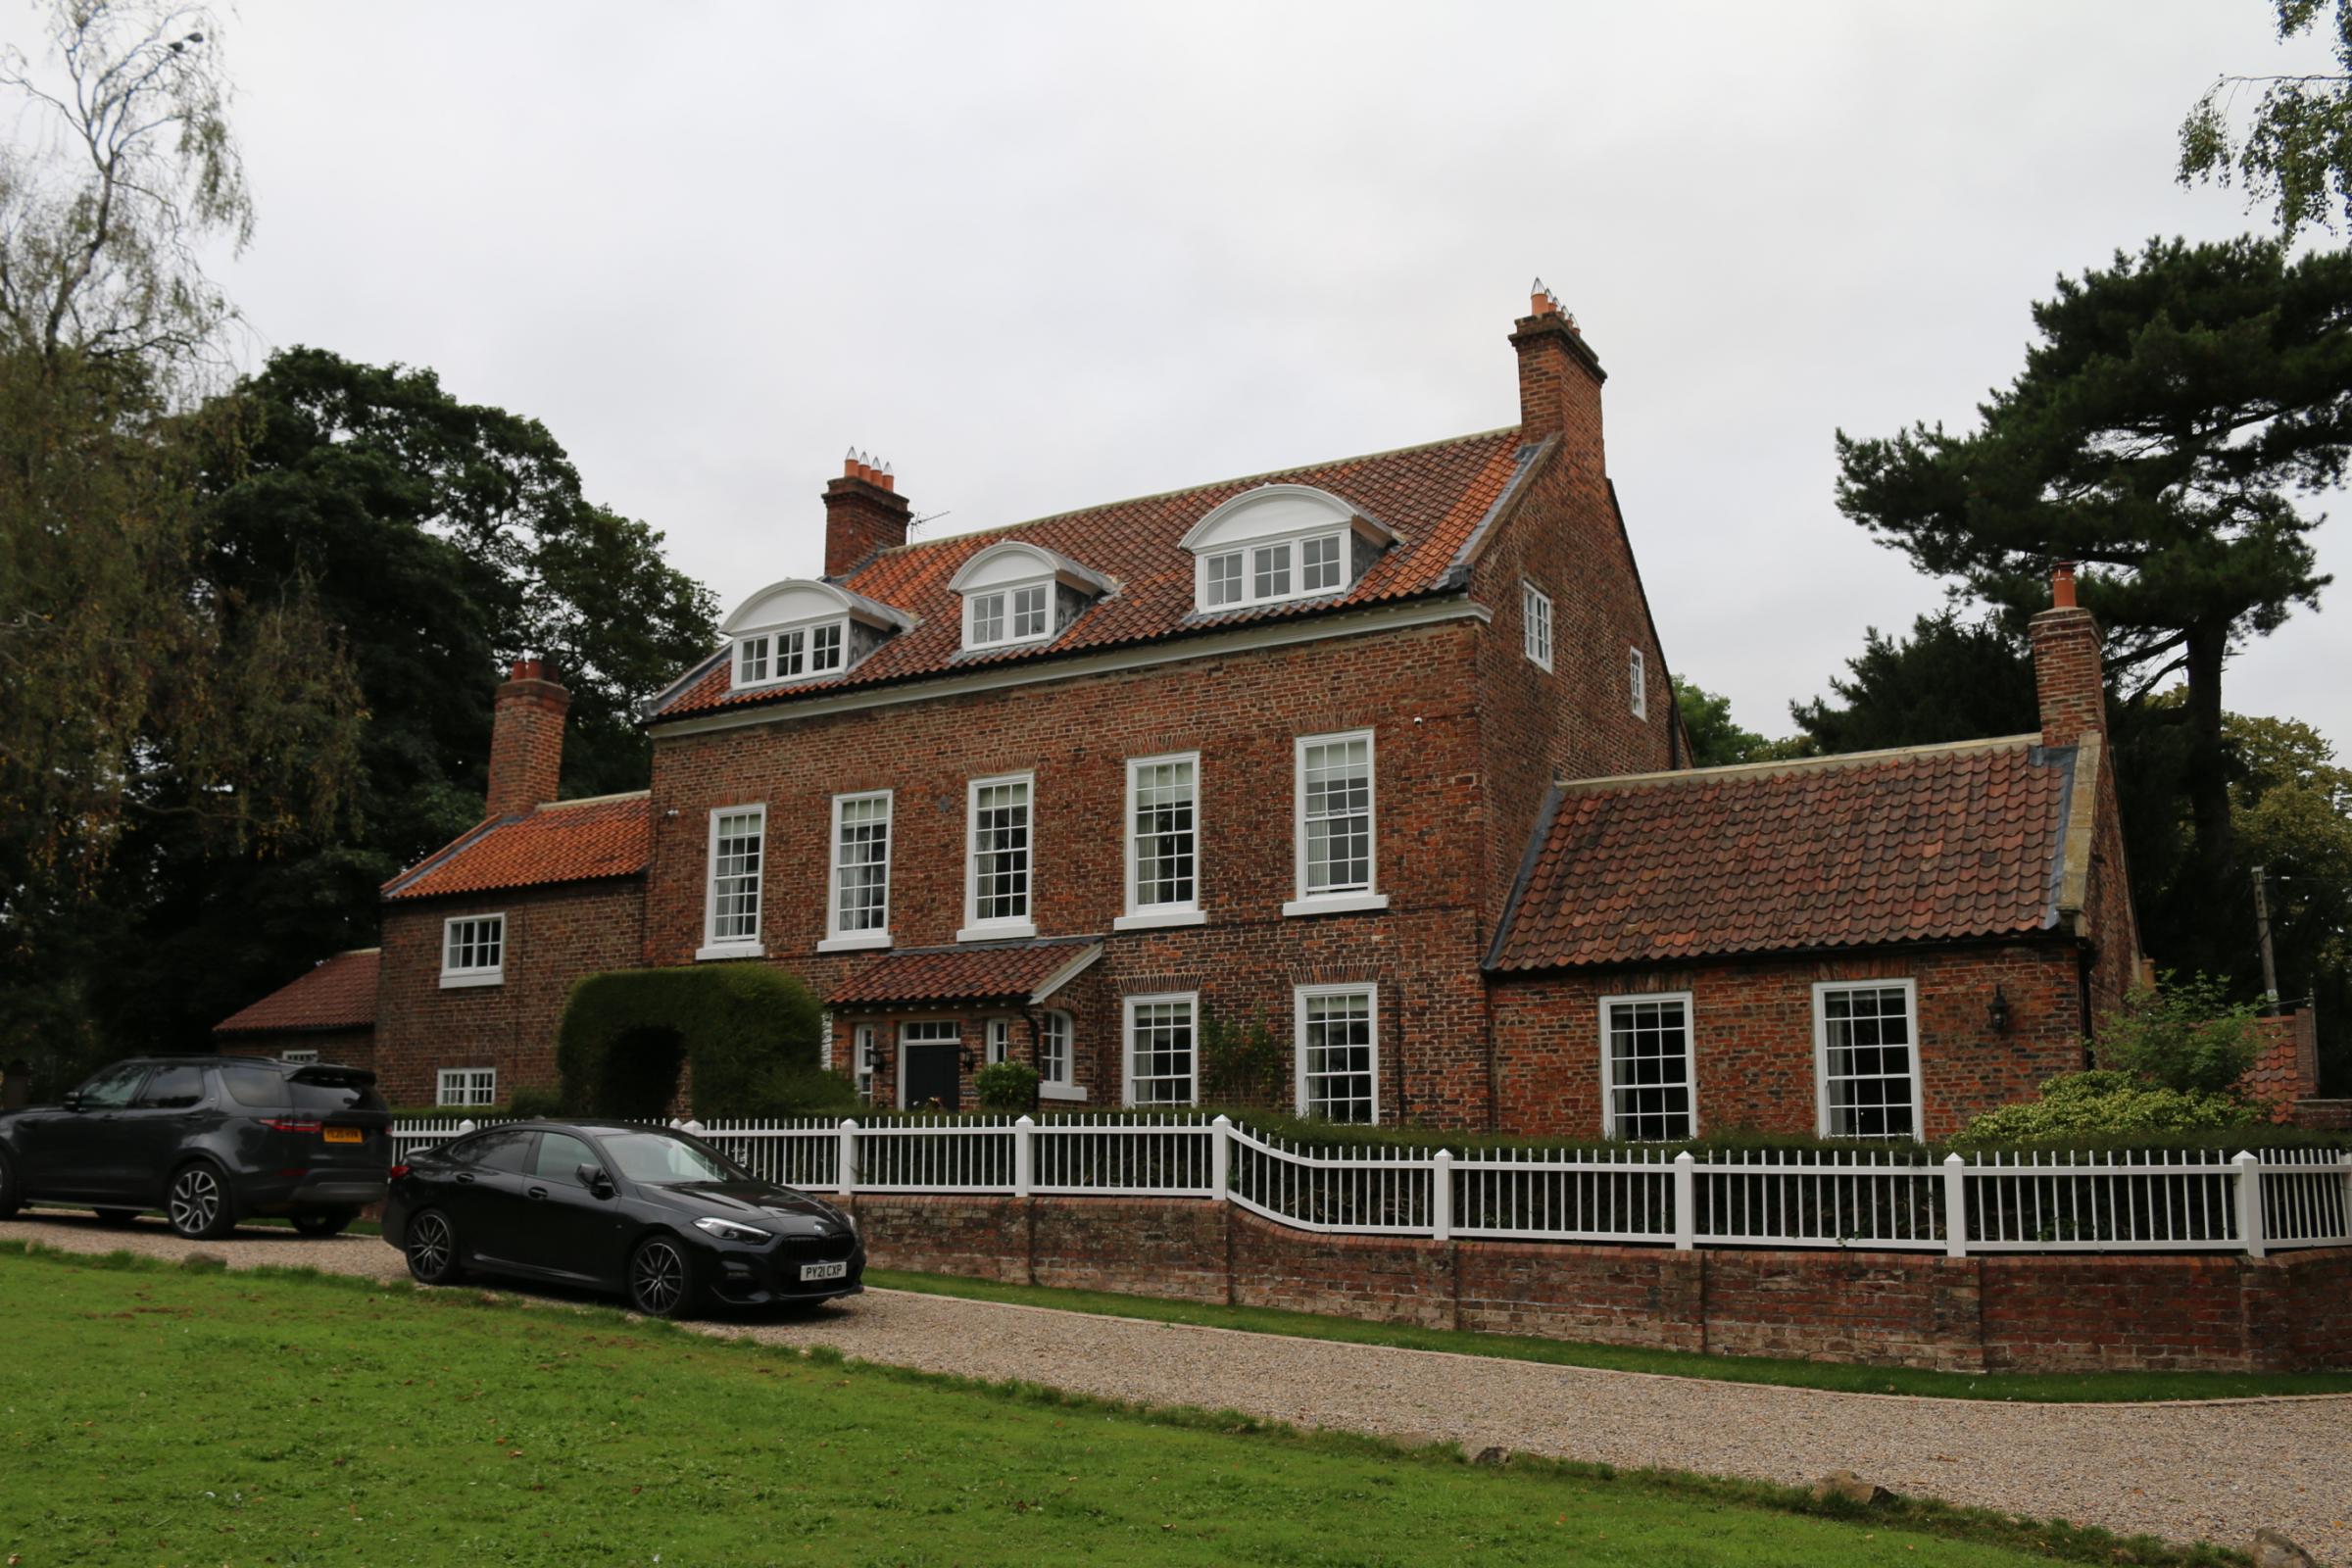 East House, Great Smeaton: behind it is the cricket ground, and on its front is a Sun firemark